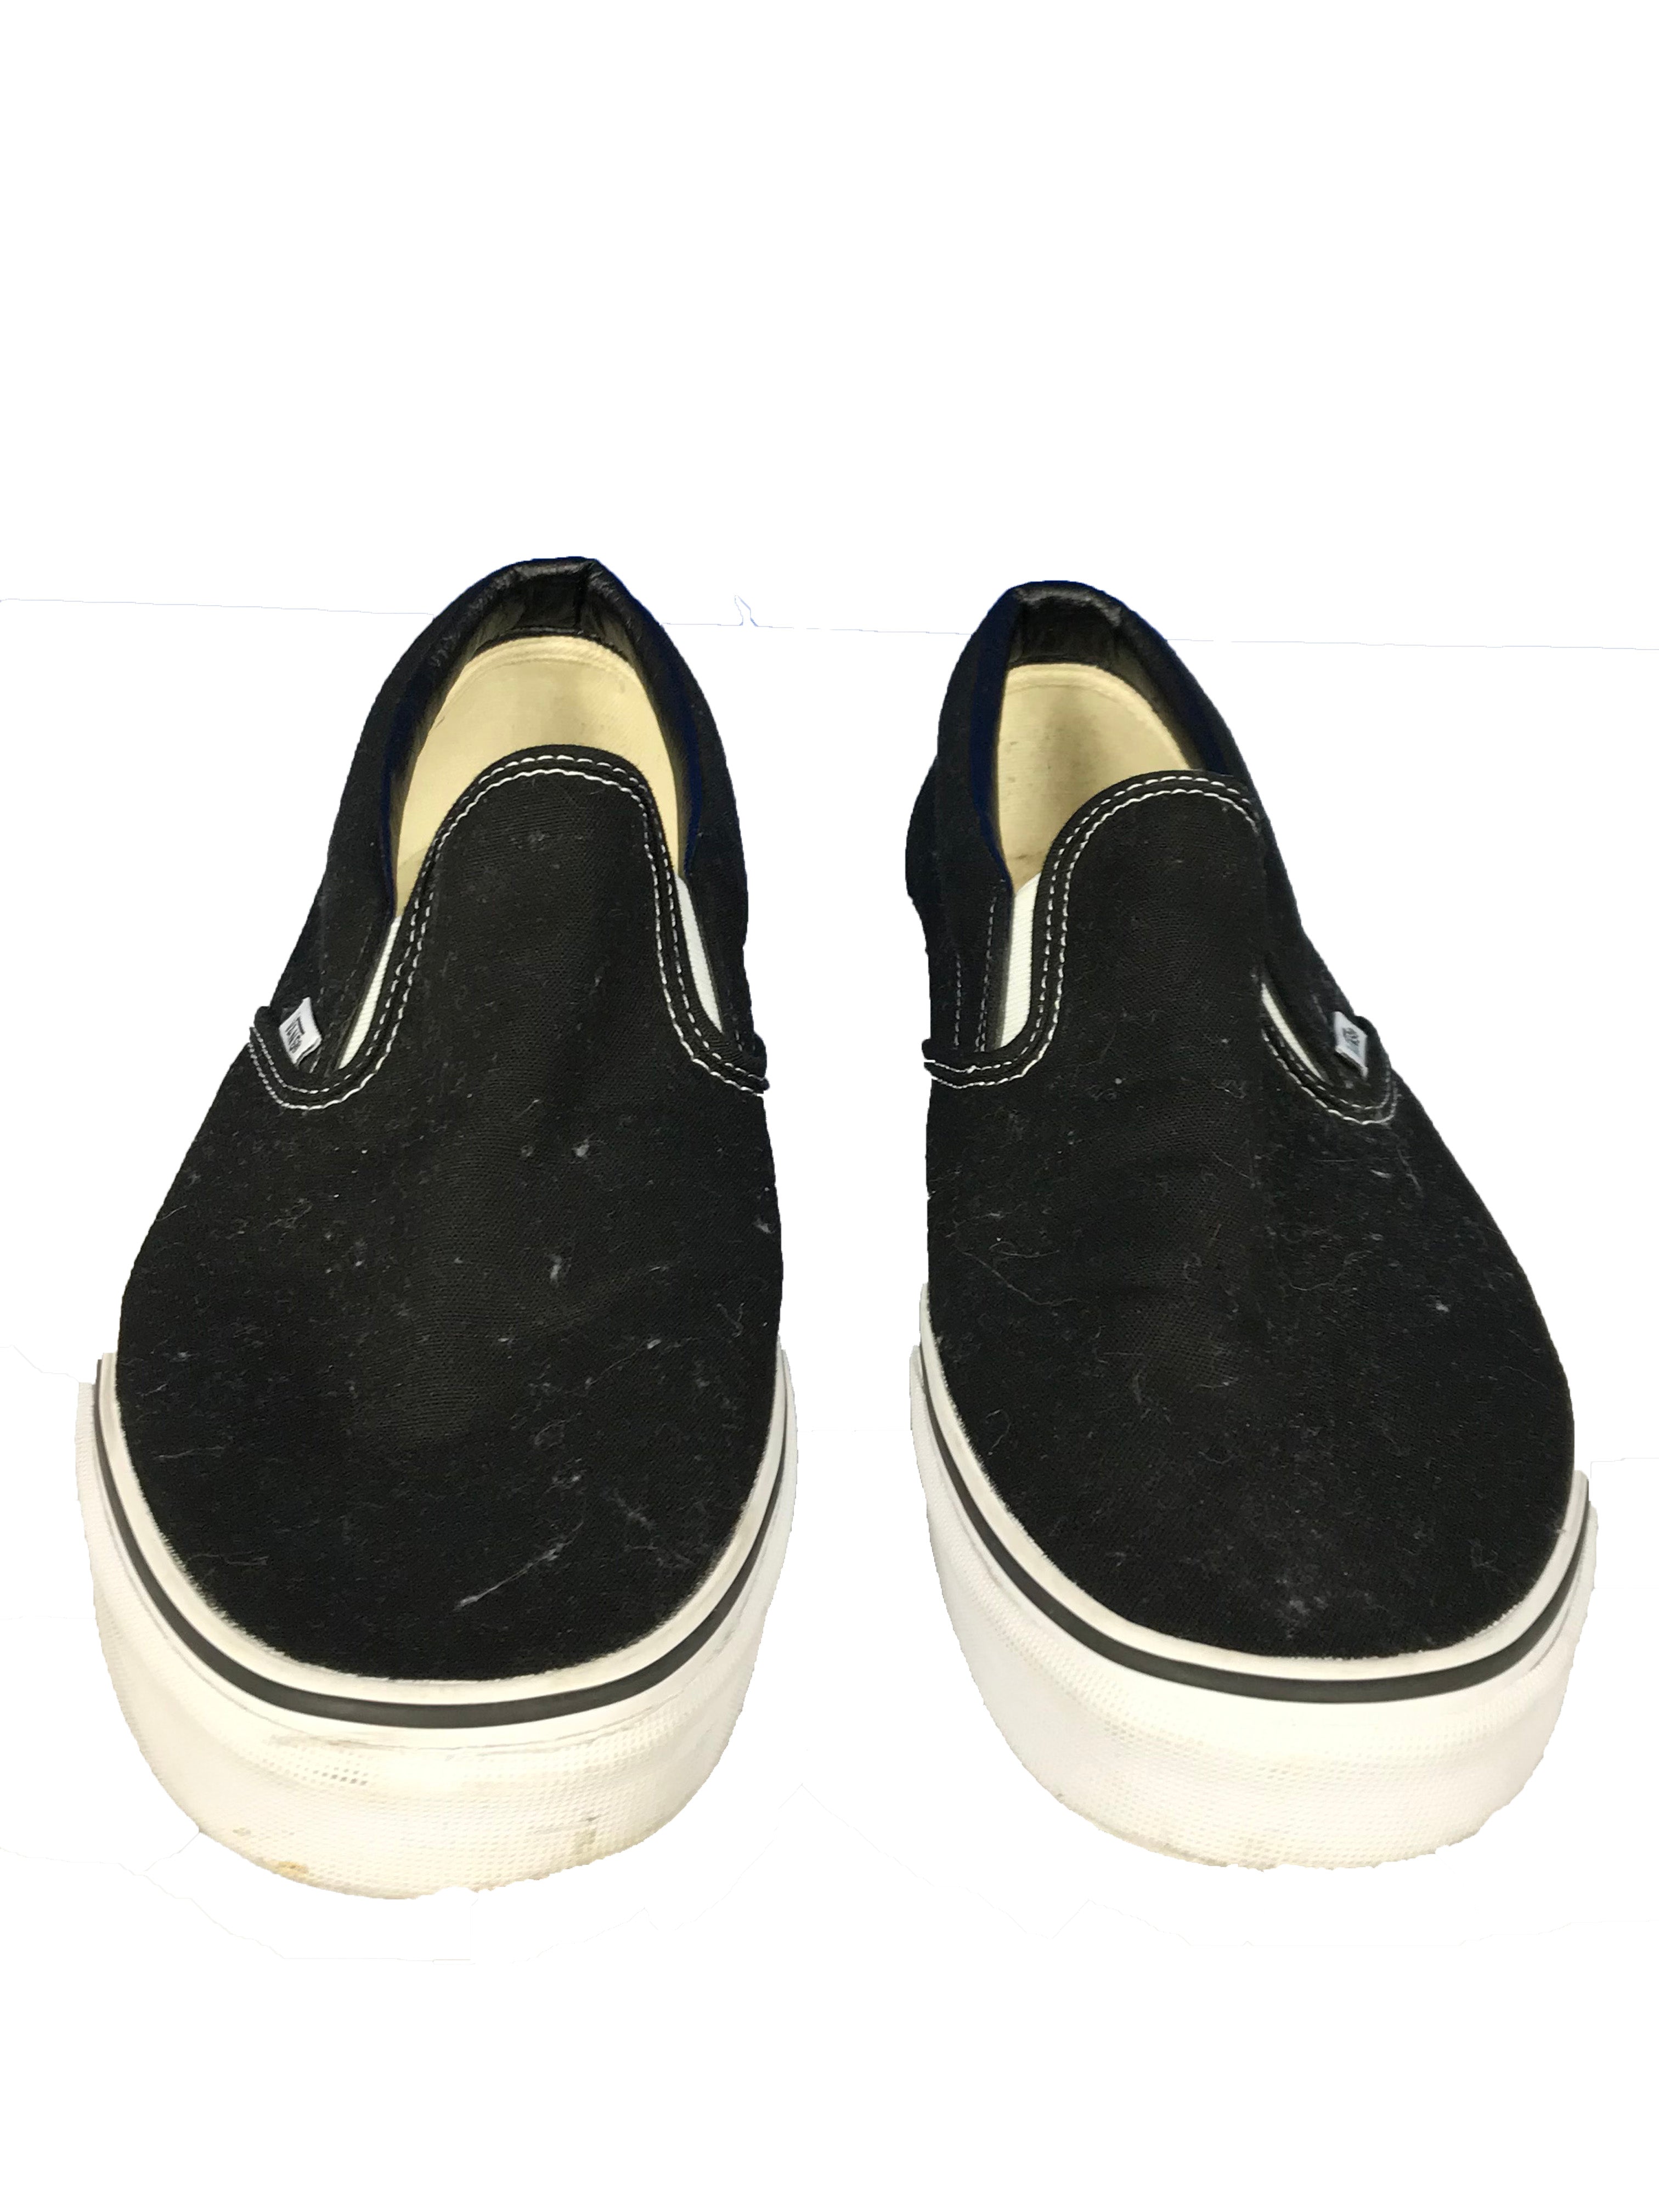 Vans Off The Wall Black Slip-On Canvas Shoes Men's Size 13